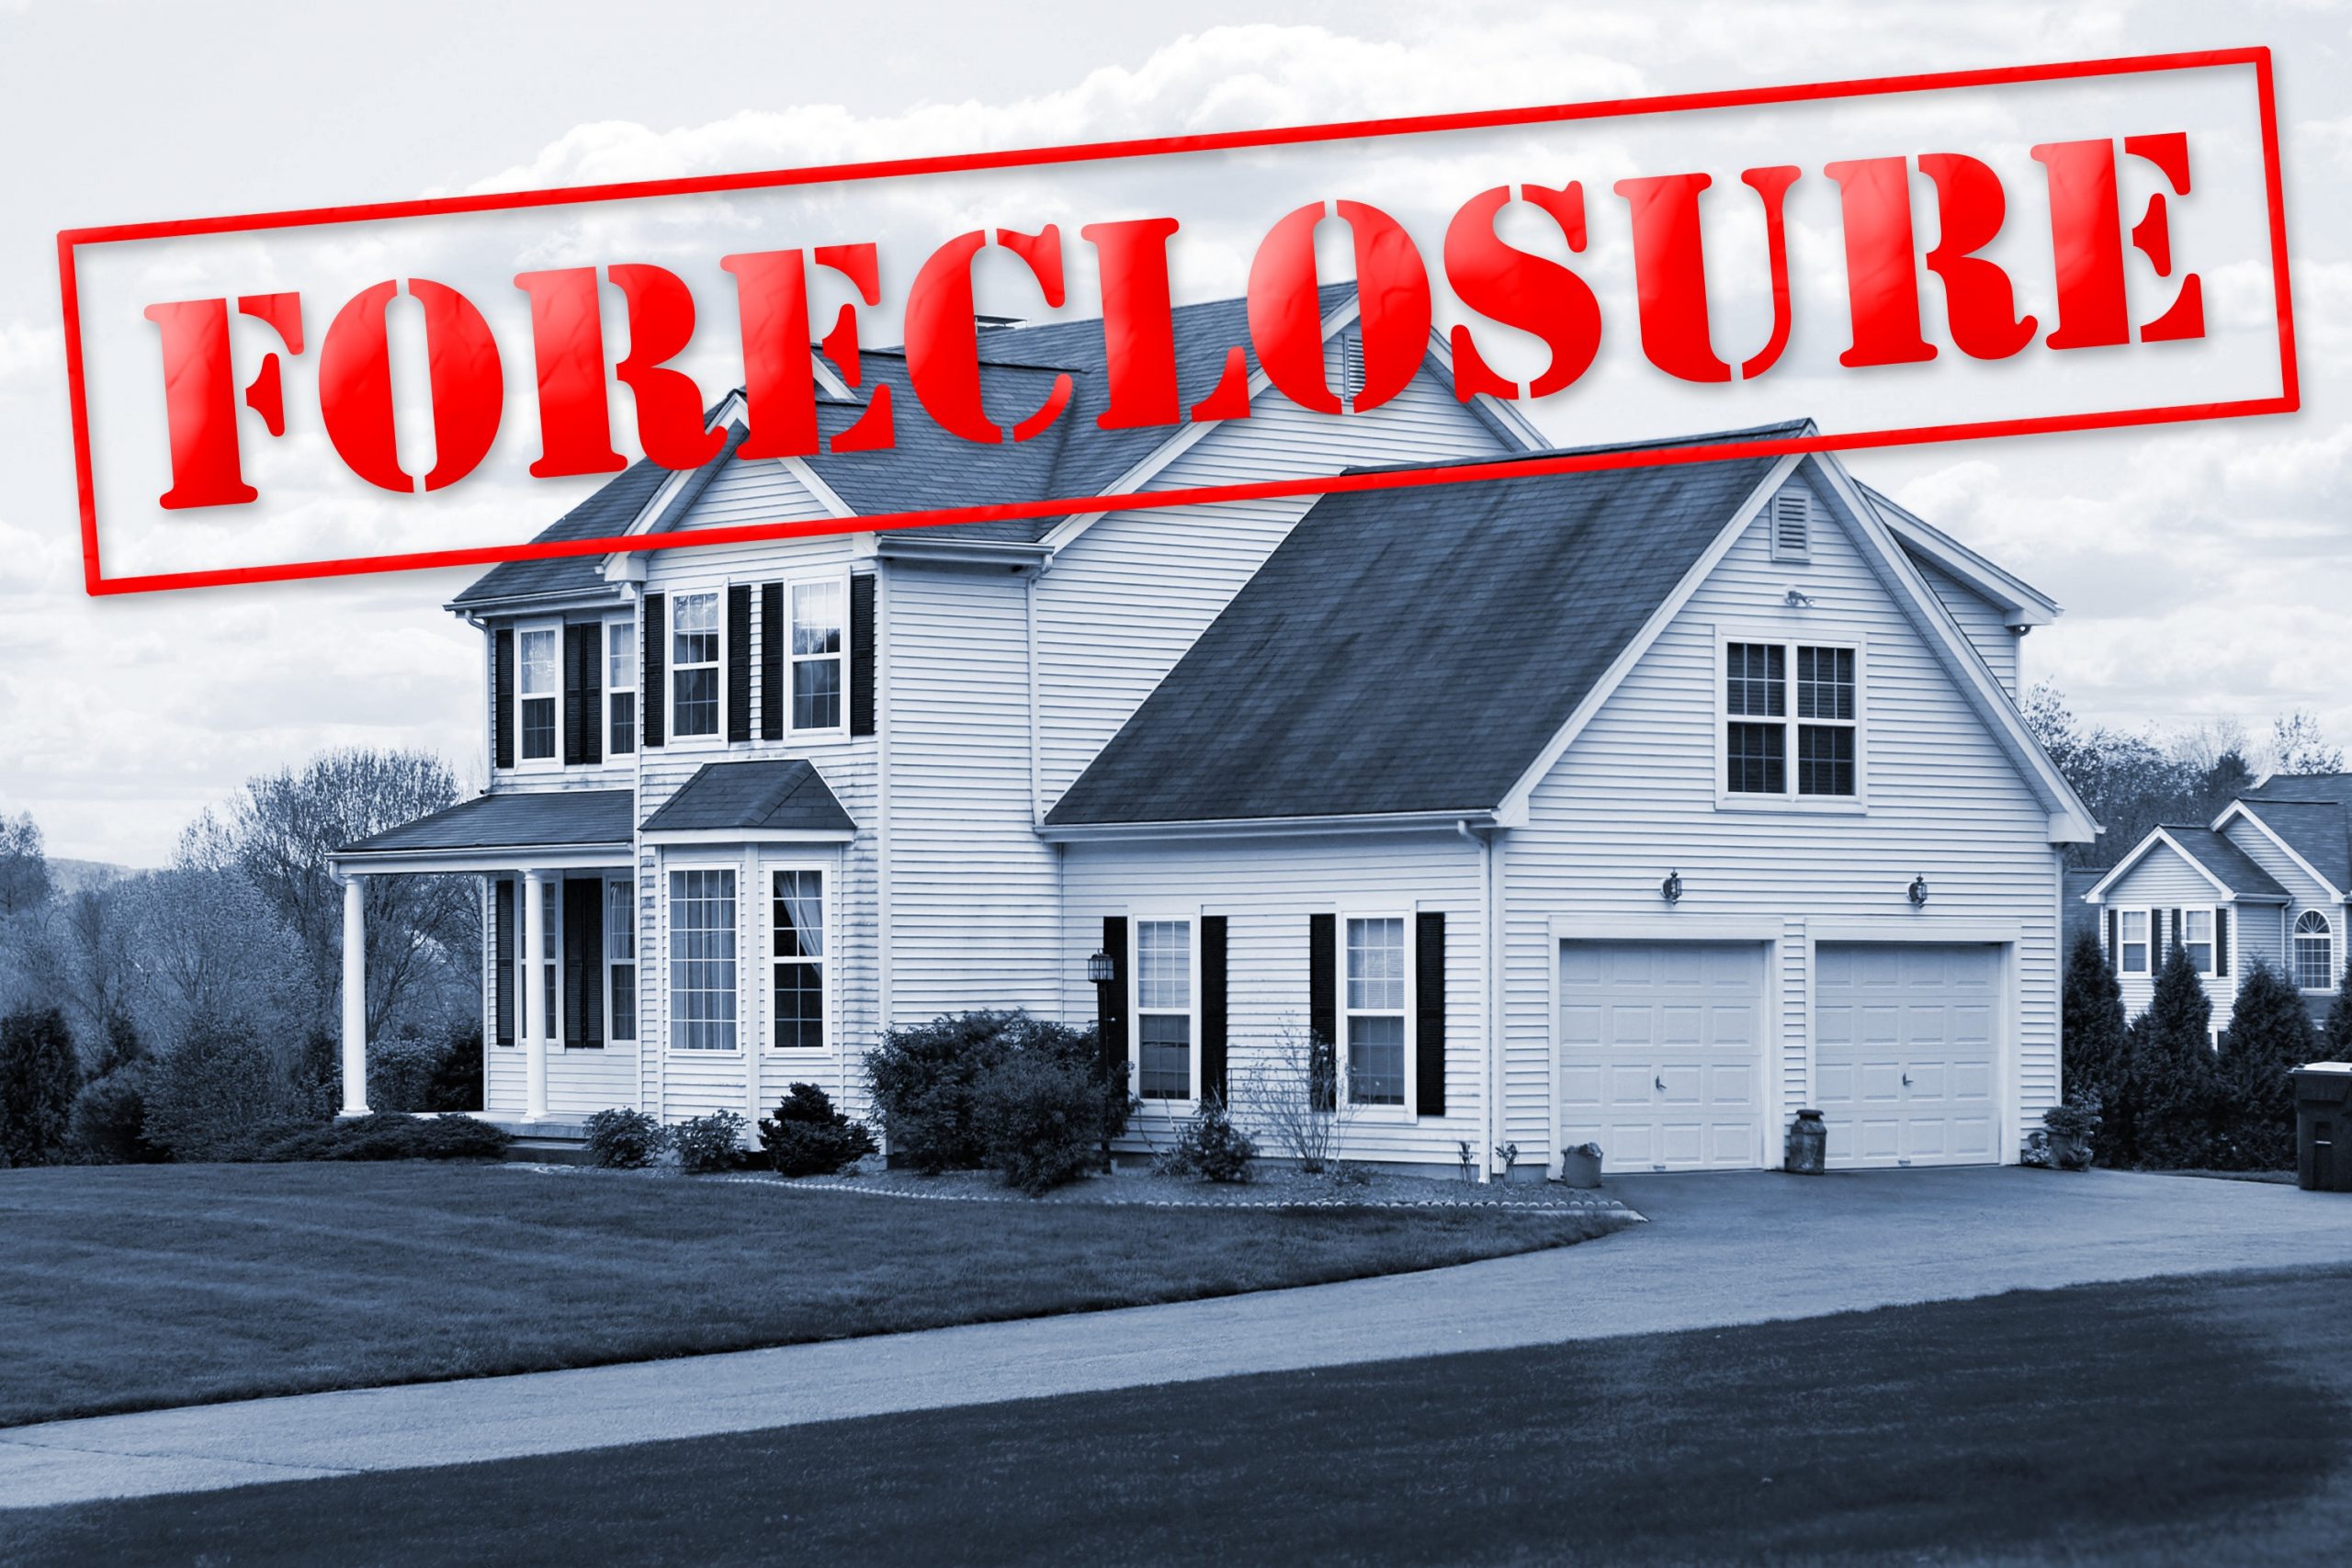 First Person: 6 Steps to Take When Facing Foreclosure